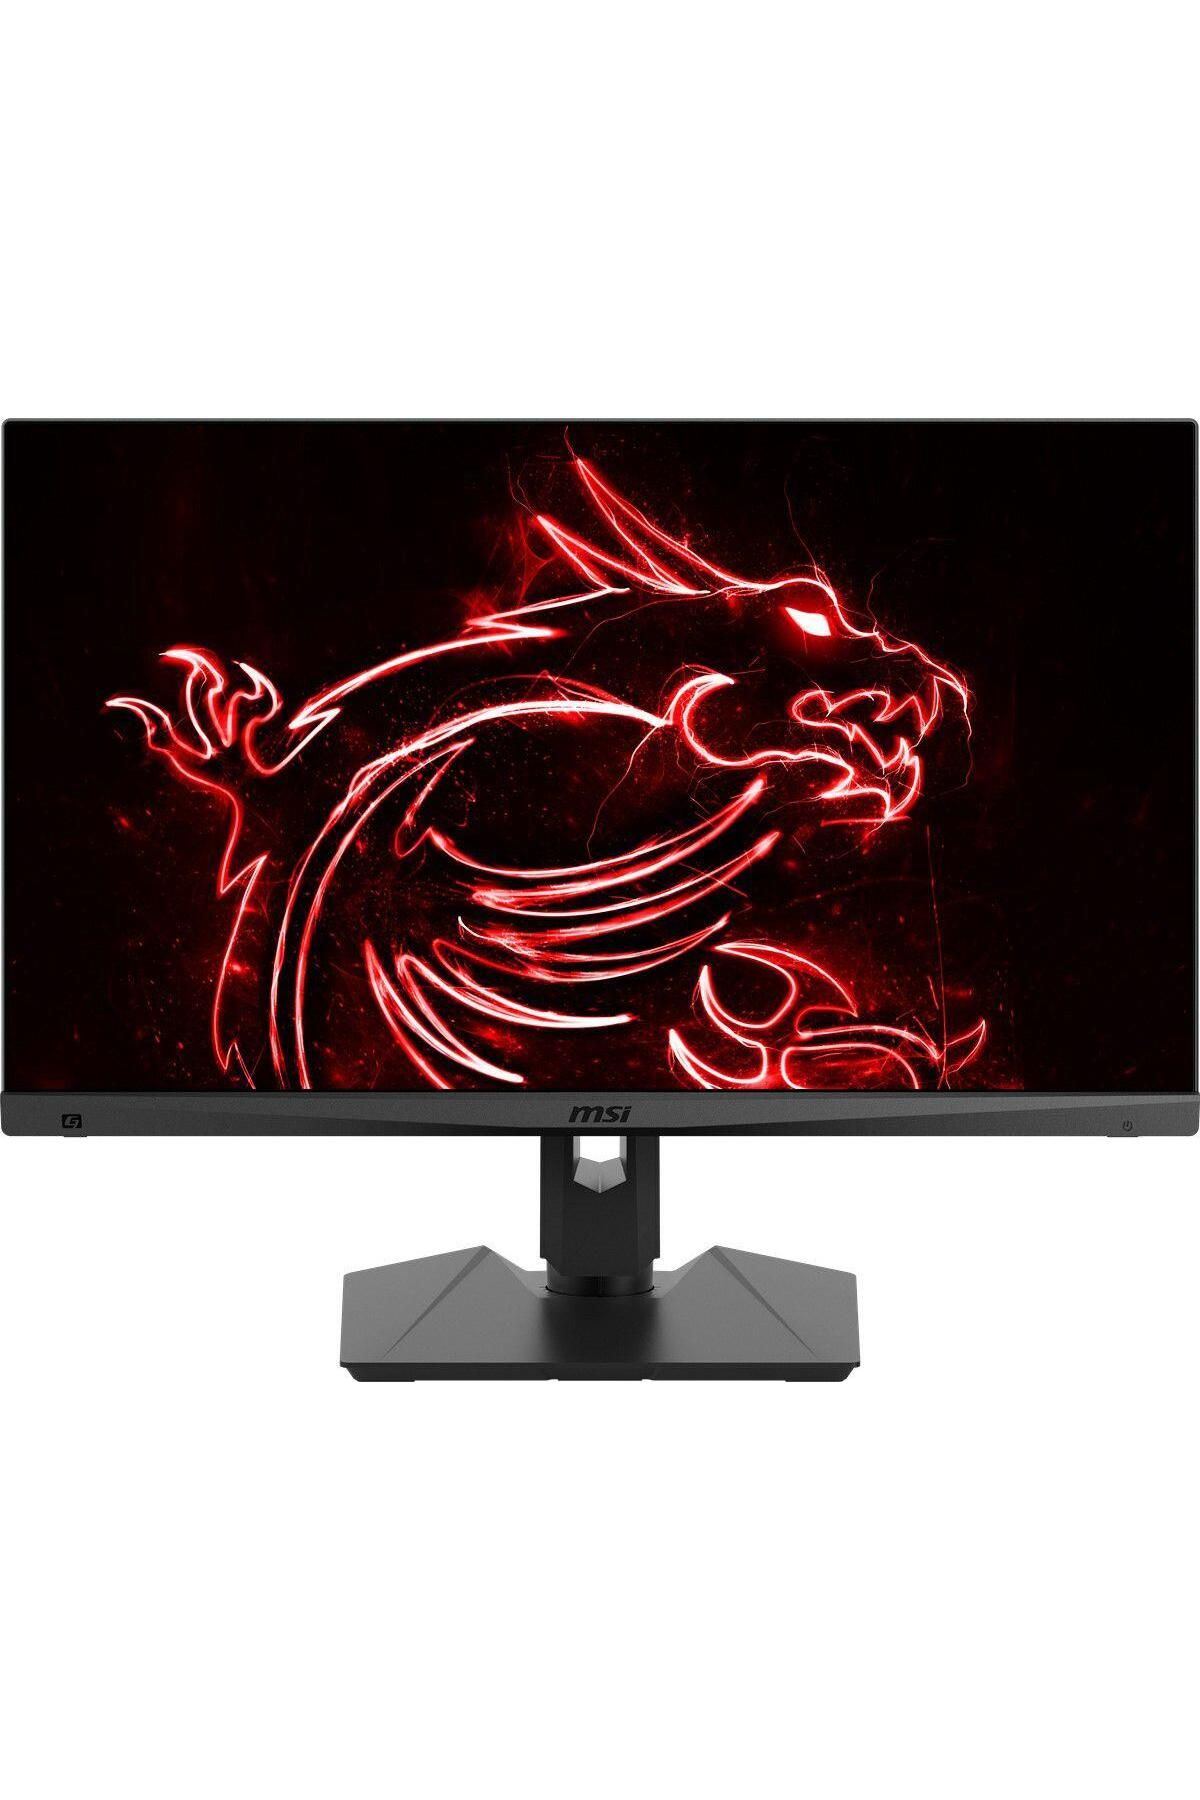 MSI 27" OPTIX MAG274R2 FLAT IPS 1920X1080 (FHD) 16:9 165HZ 1MS G-SYNC COMPATIBLE GAMING MONITOR